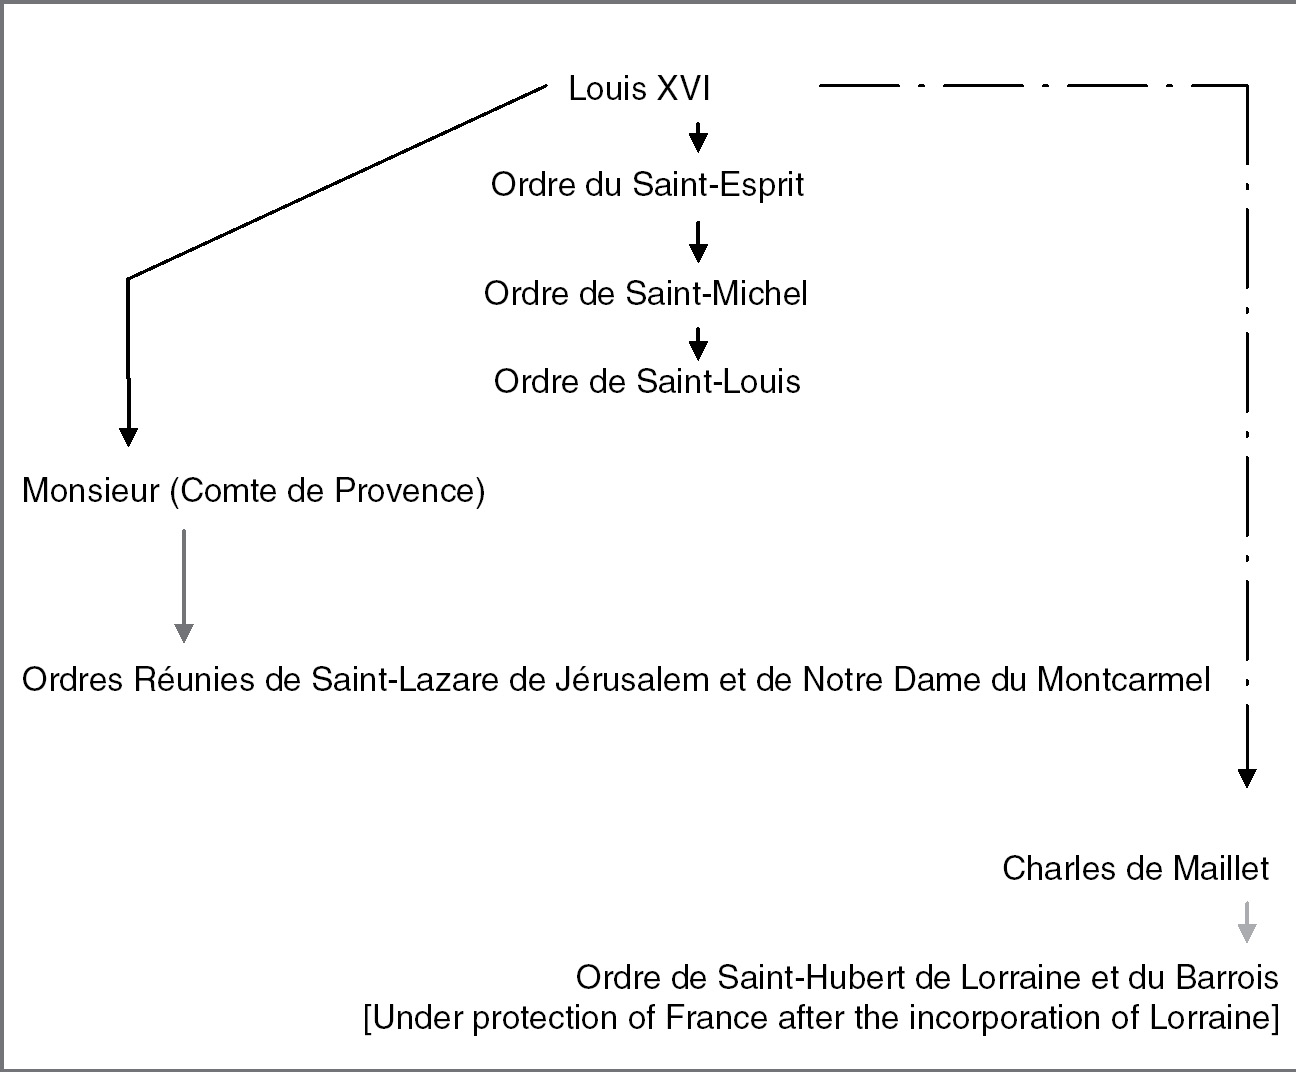 Reform And Survival Of The Ancien Regime Part Ii Louis Xvi And The French Revolution 17 1792